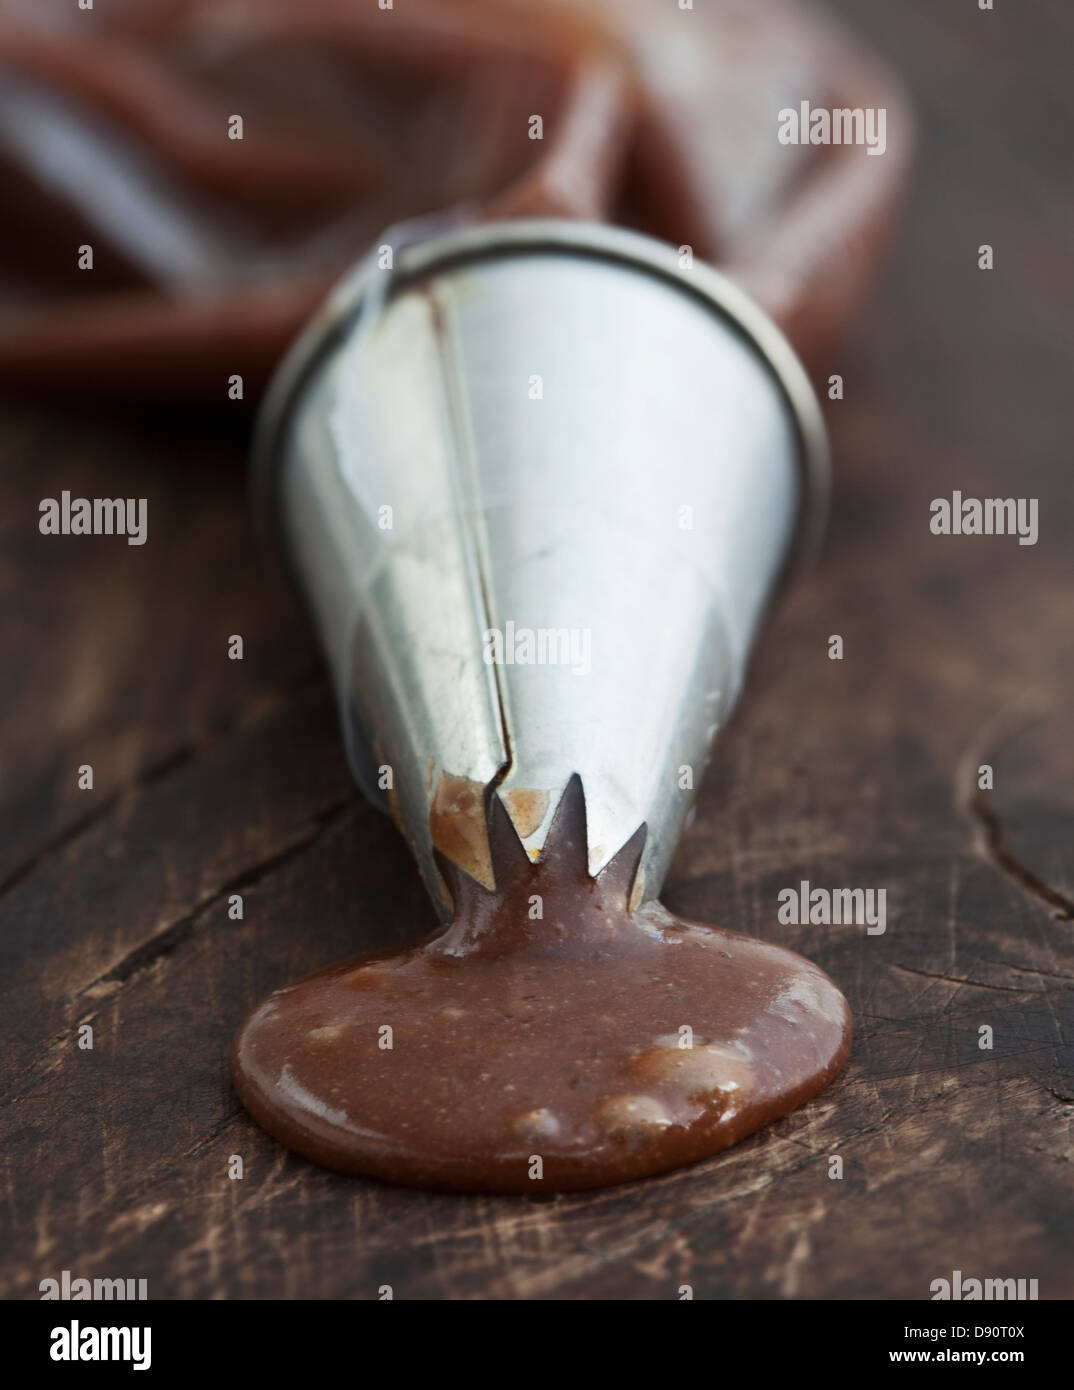 Liquidized chocolate coming out from cone Stock Photo